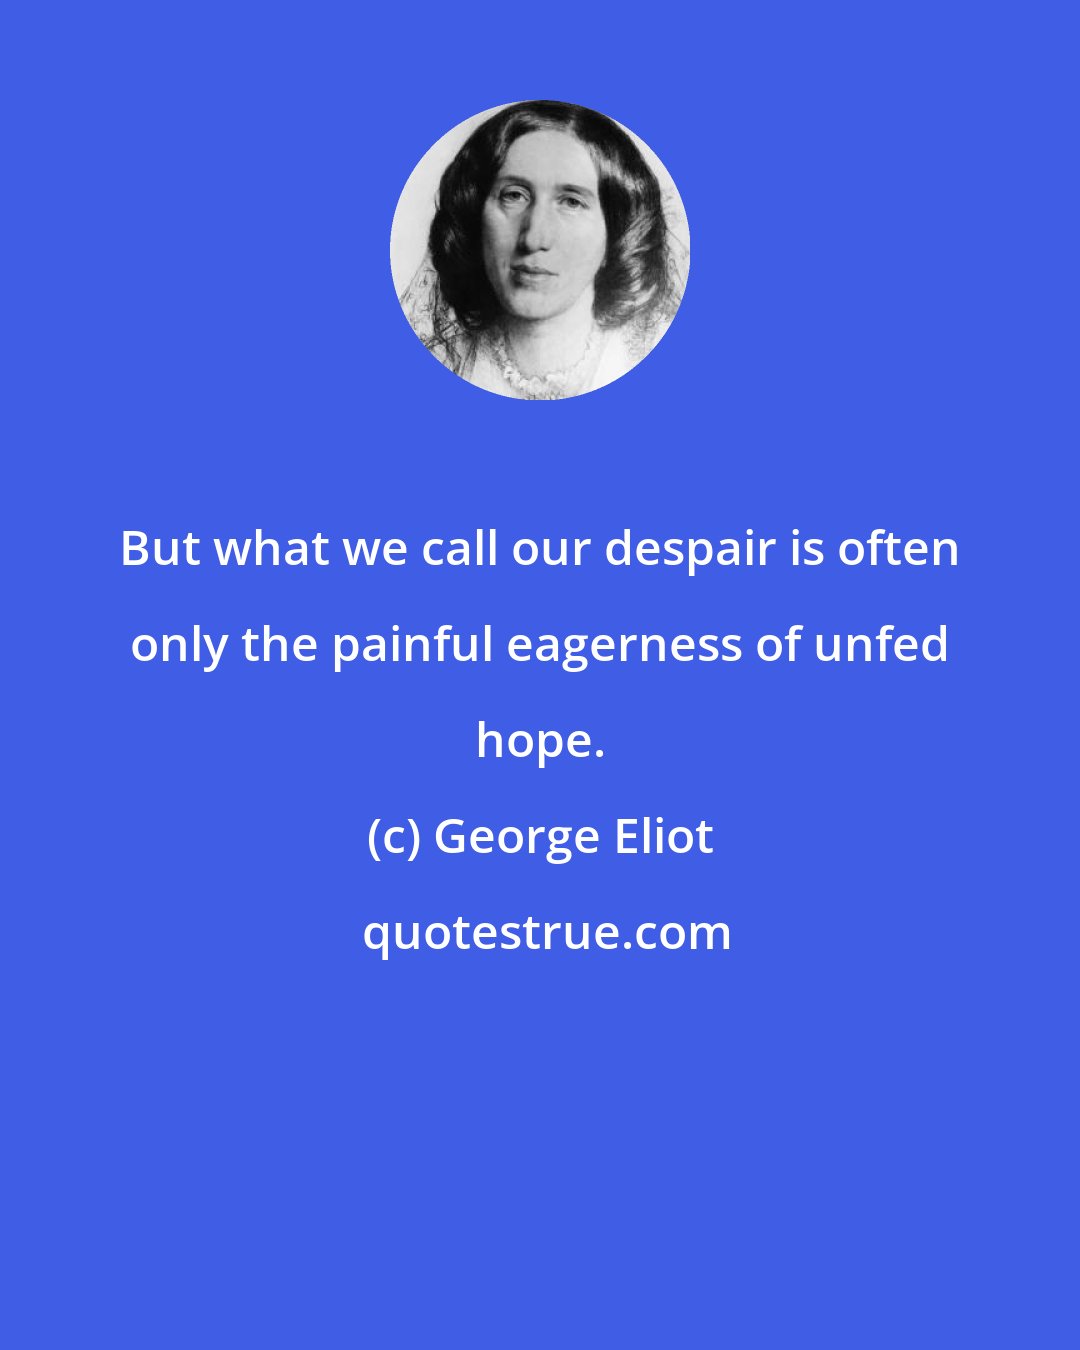 George Eliot: But what we call our despair is often only the painful eagerness of unfed hope.